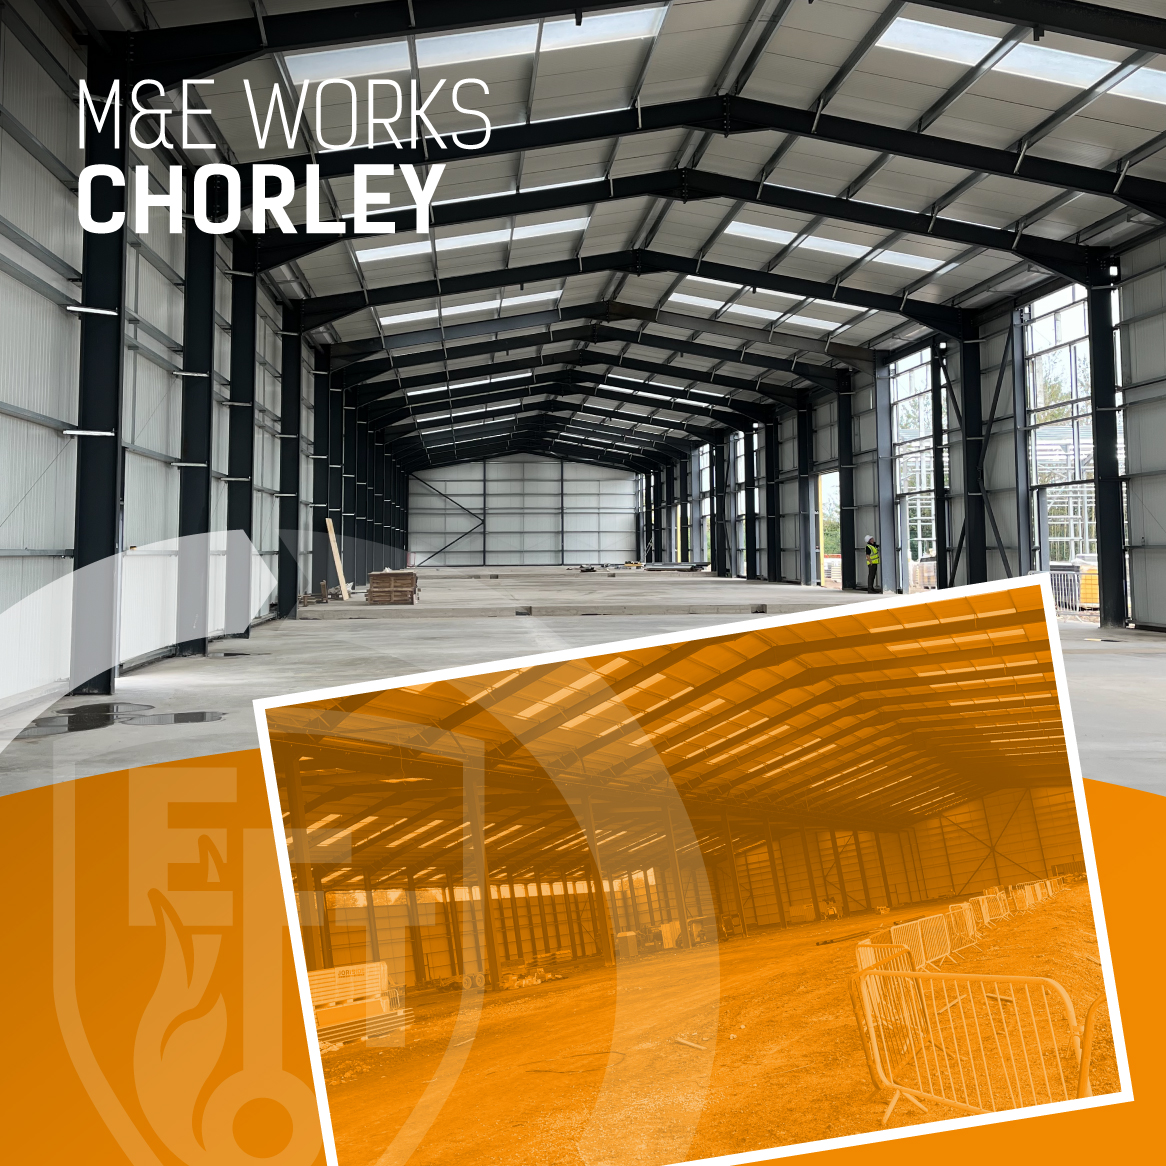 M&E Works in Chorley